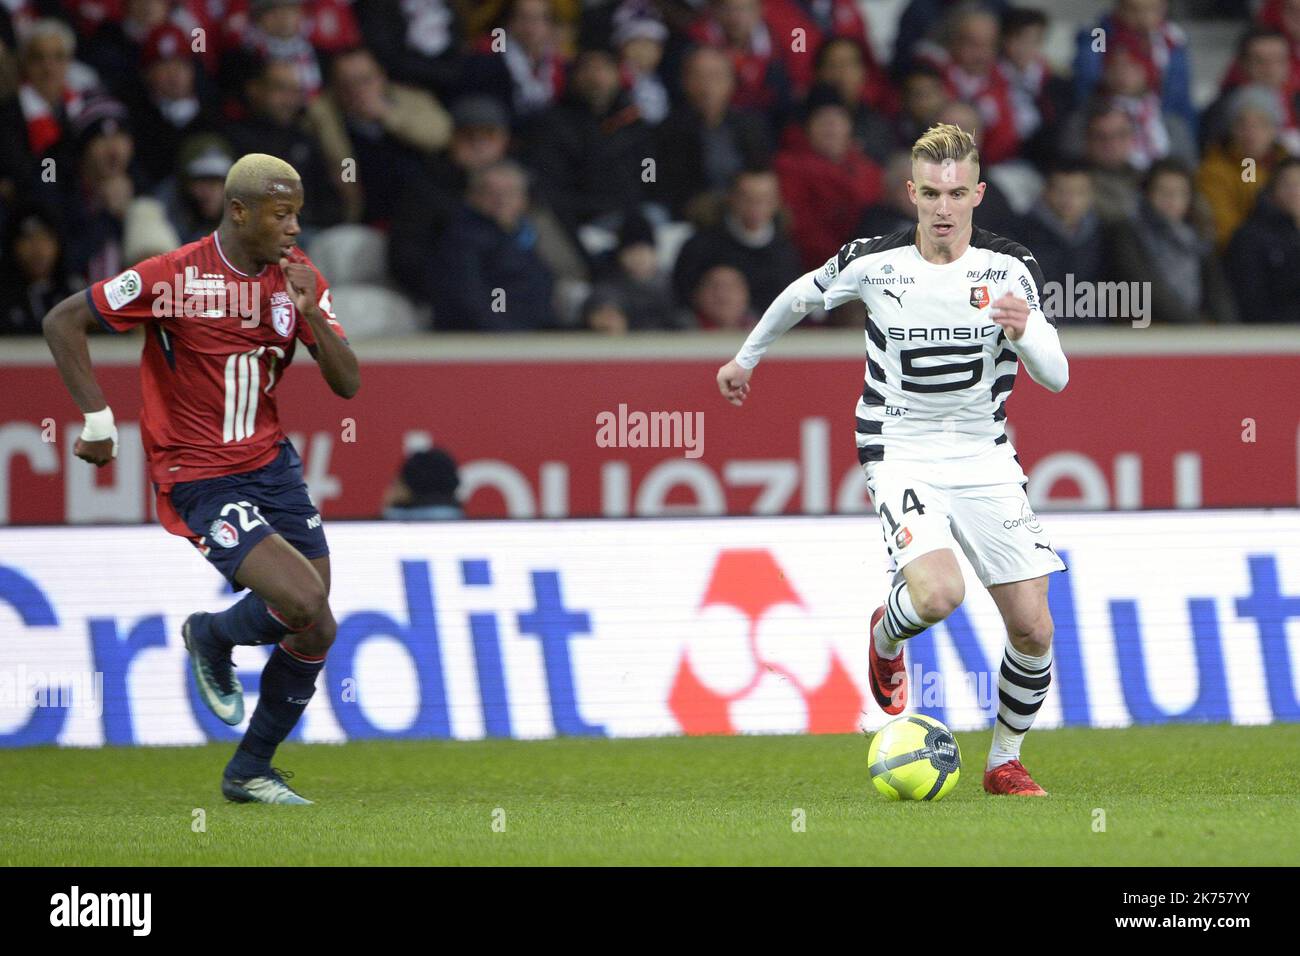 Benjamin Bourigeaud . 14 . Hamza Mendyl . 27 . during the Lille OSC v Stade Rennais Ligue 1 match at the Stade Pierre-Mauroy, Lille Stock Photo